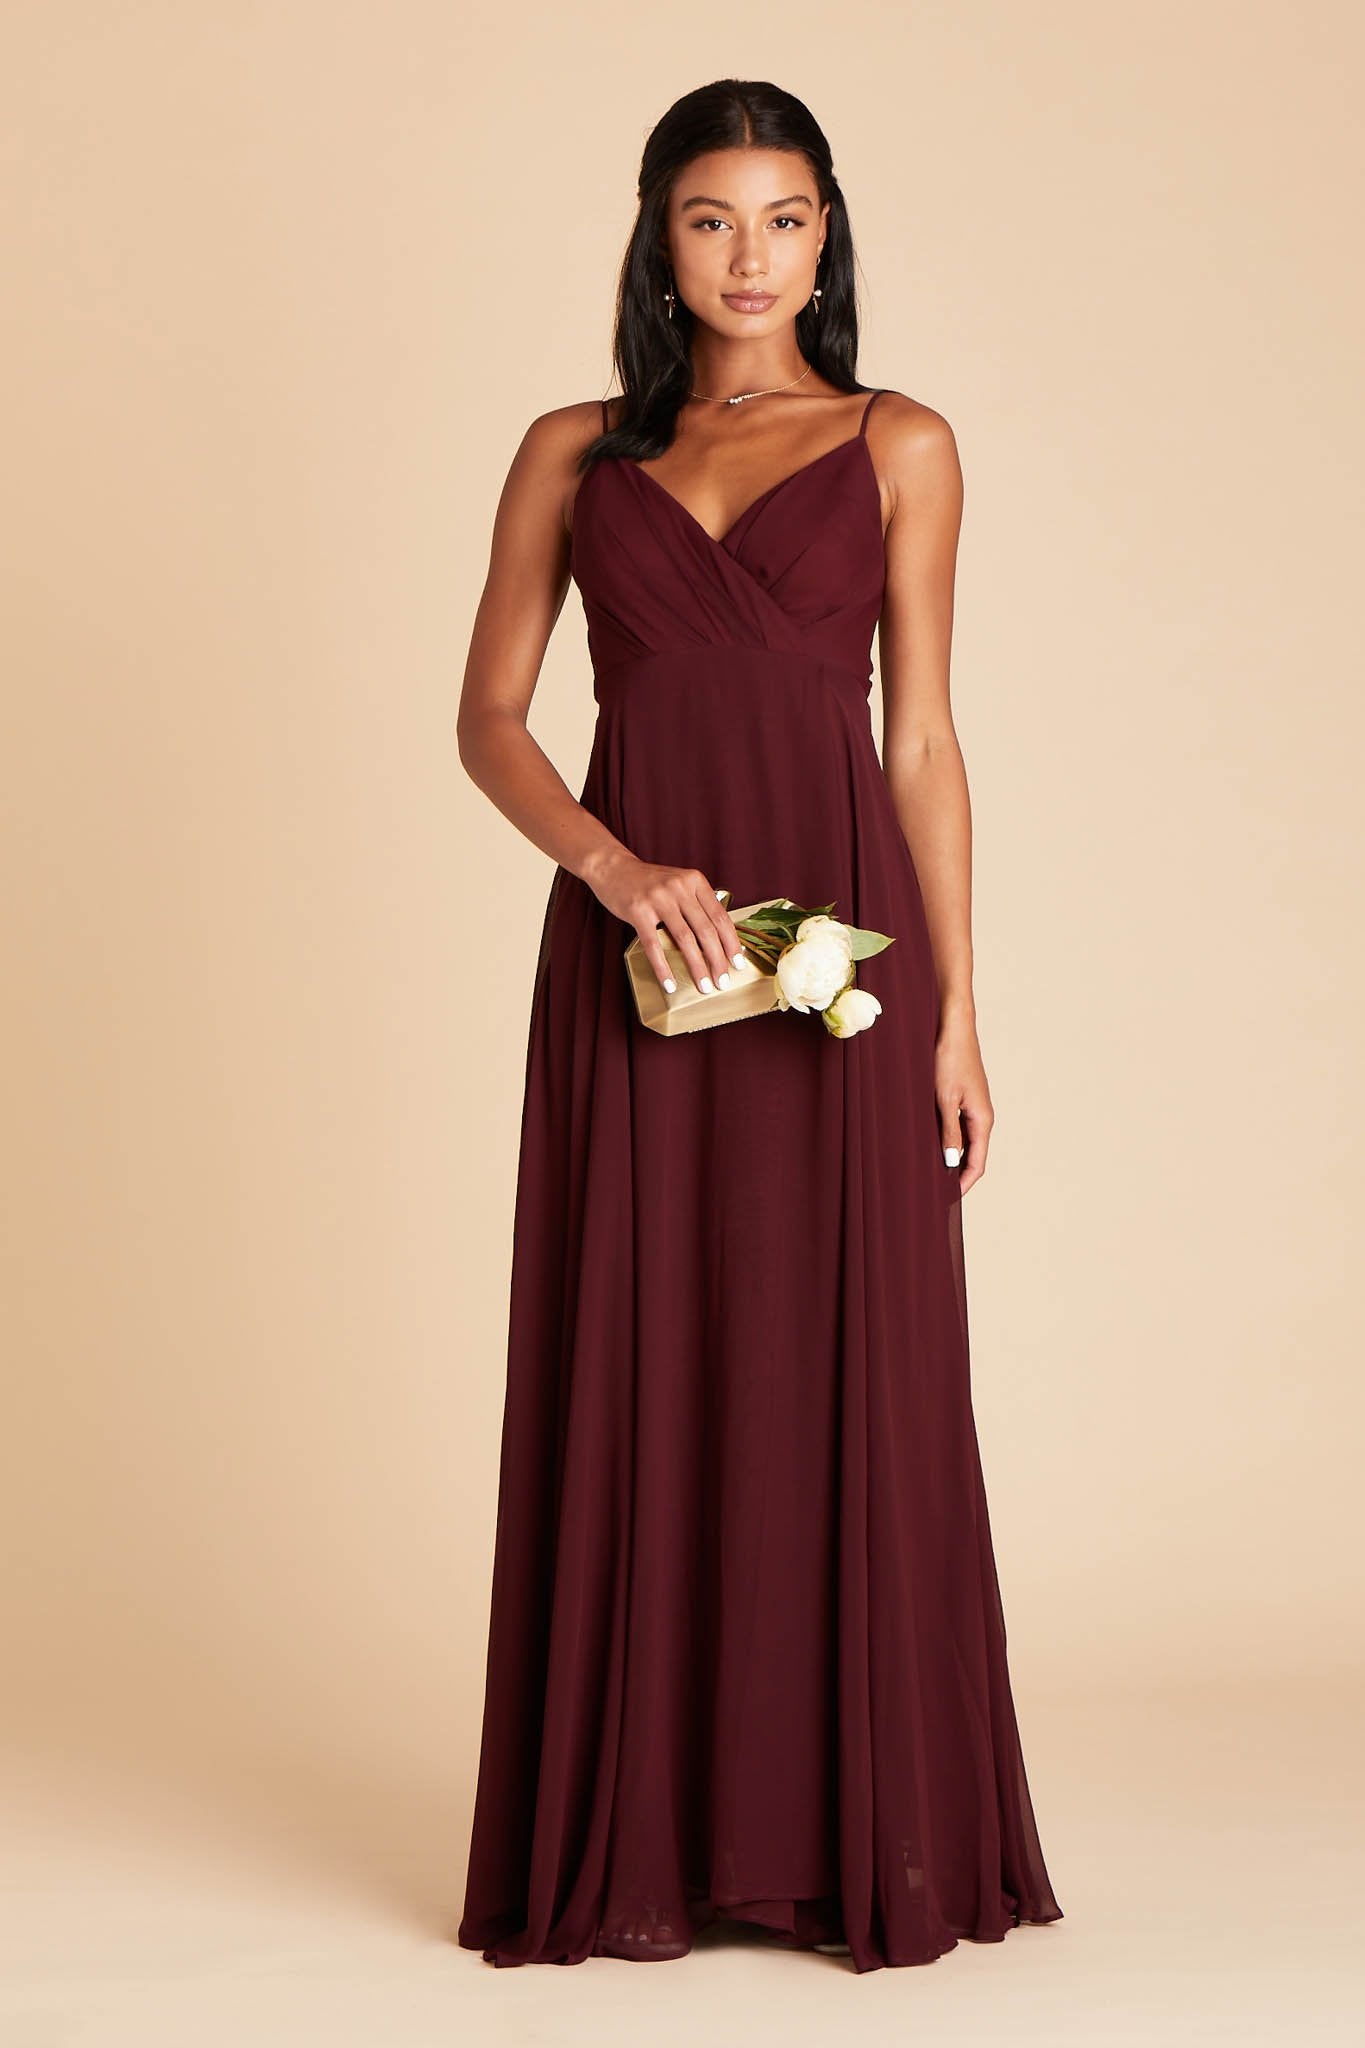 Kaia bridesmaids dress in cabernet burgundy chiffon by Birdy Grey, front view